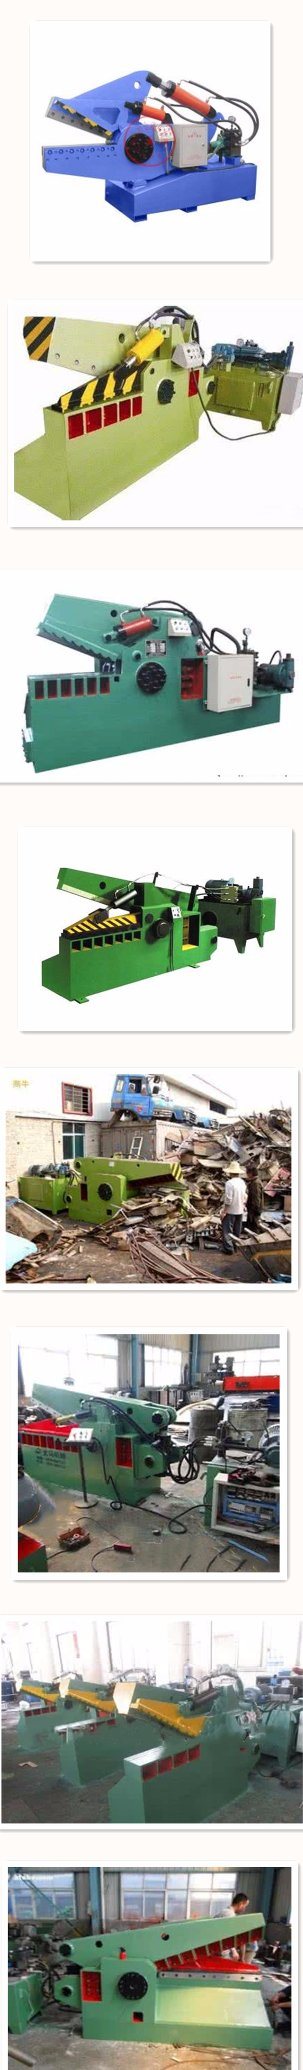 2018 Hot New Products Alligator Shearing Machine for Carpet